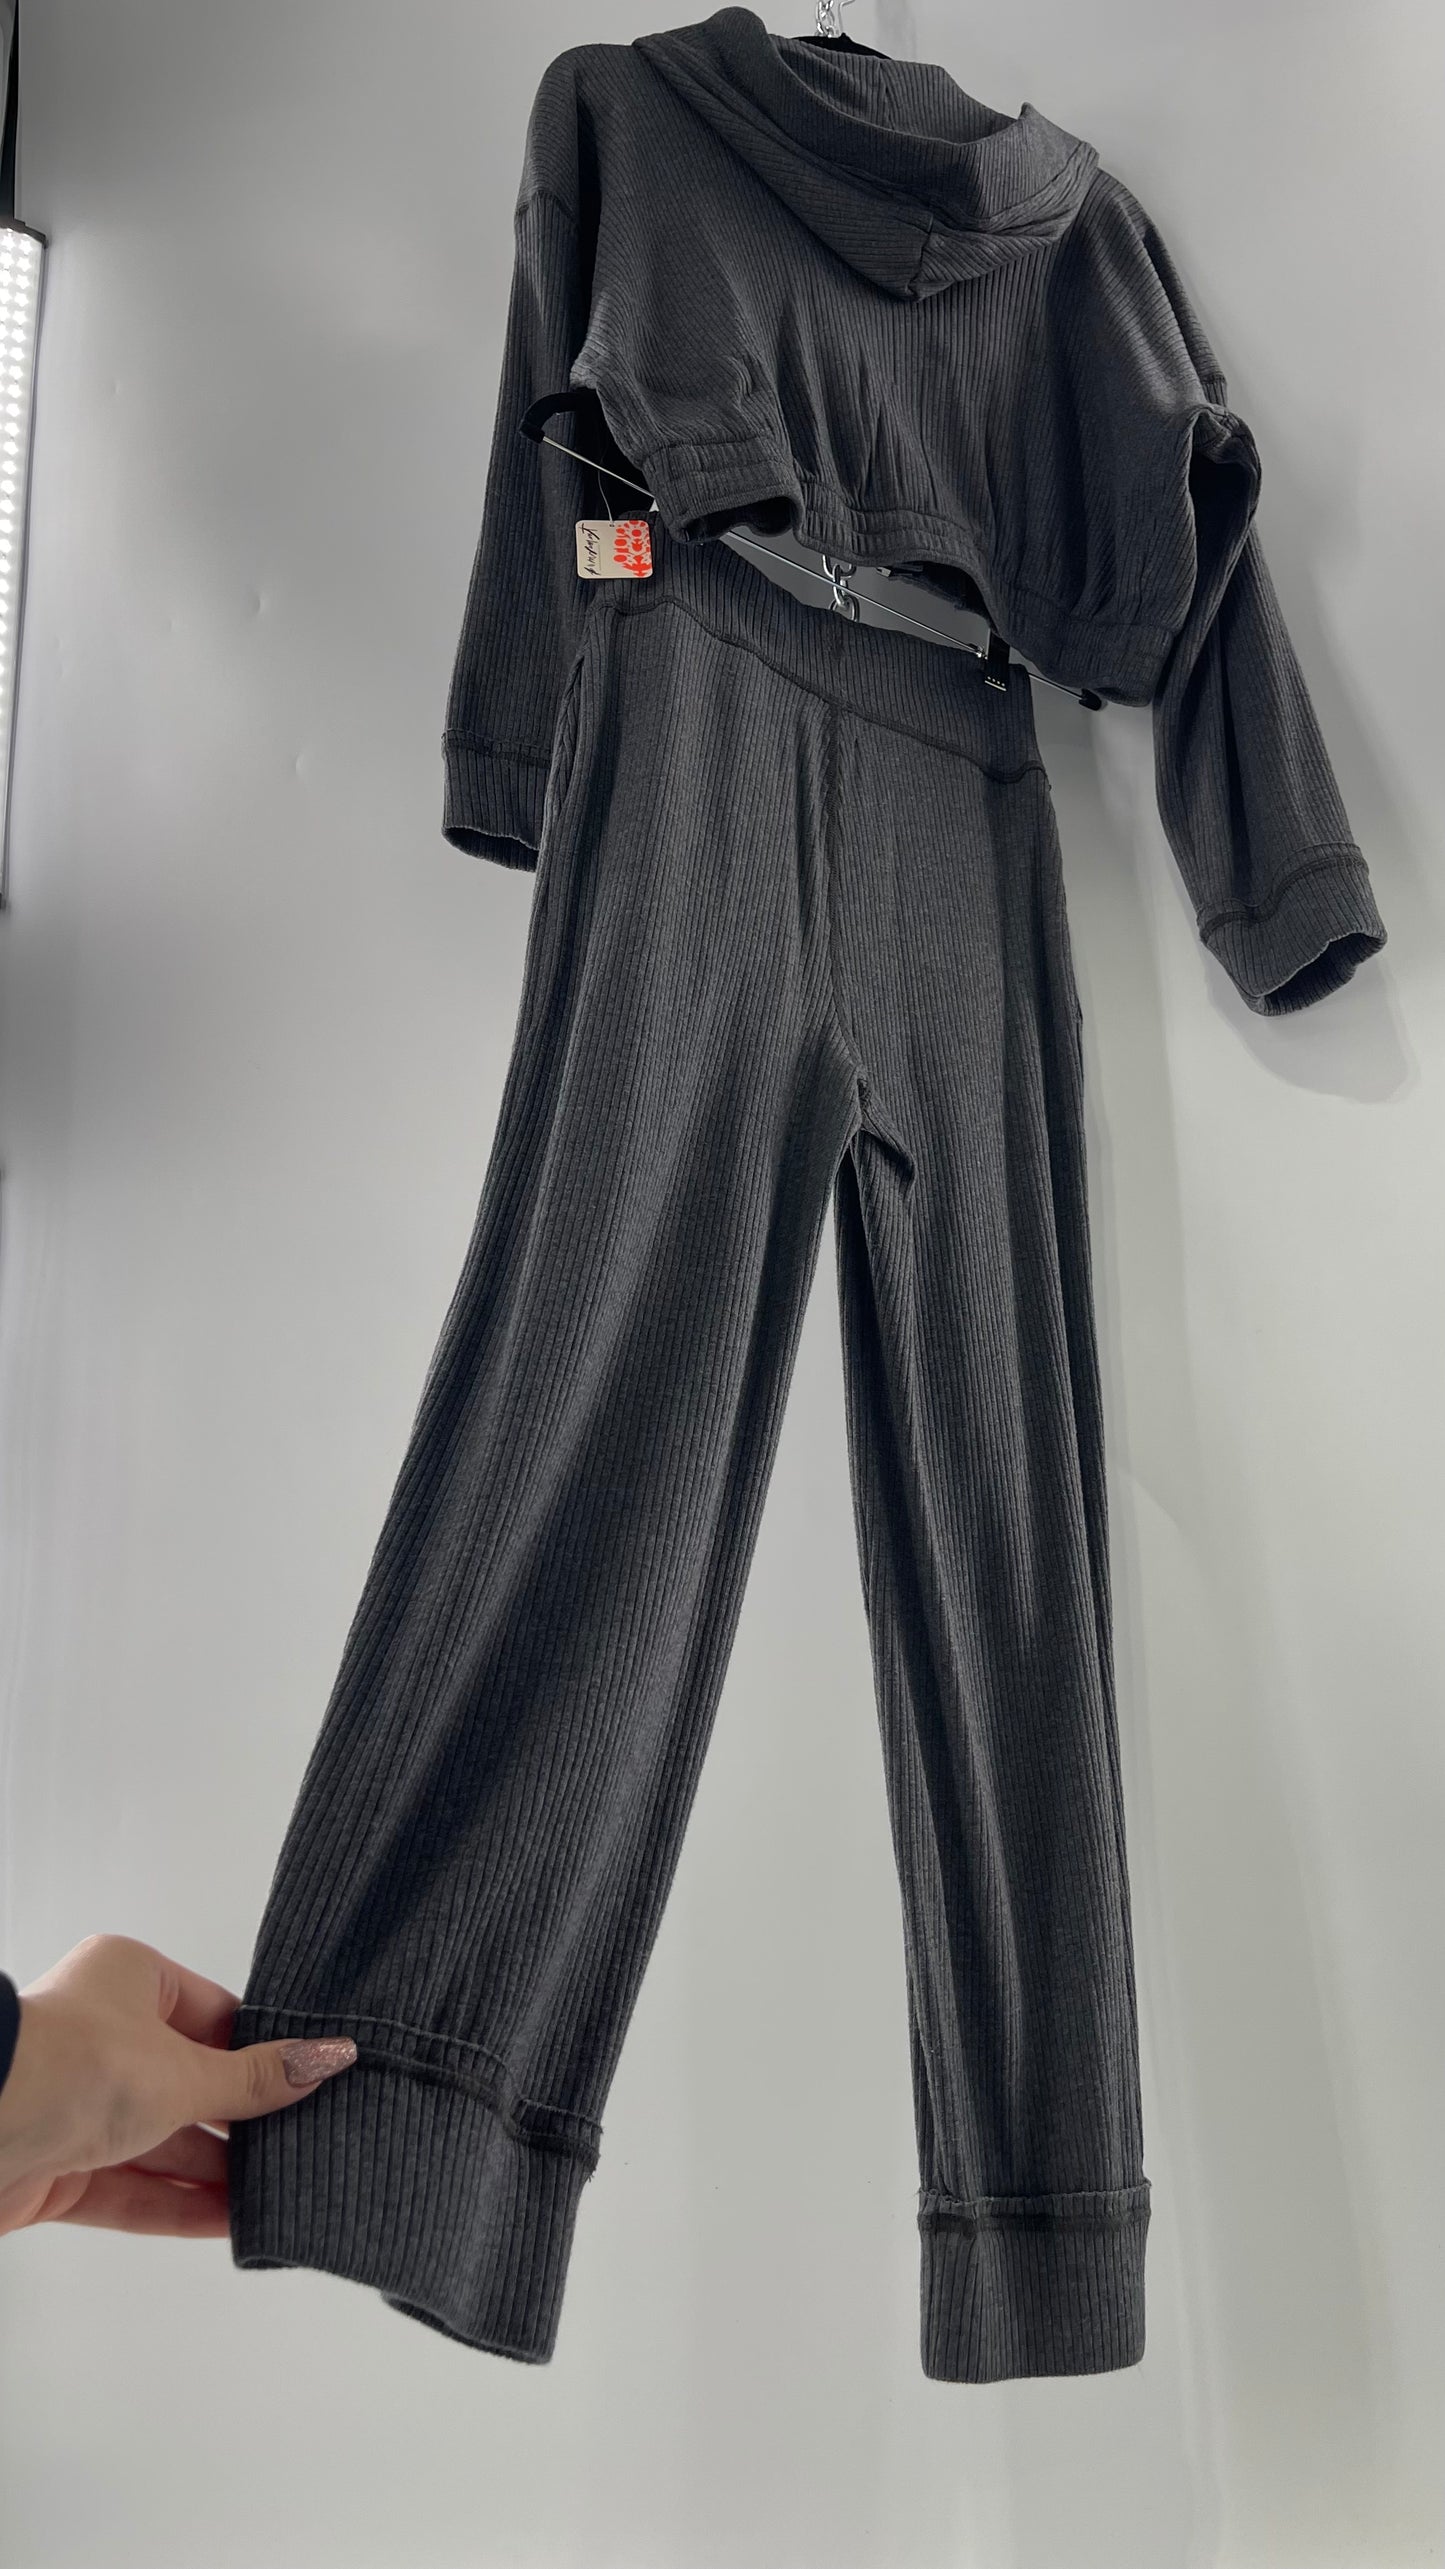 Free People Charcoal Slate Gray 2 Piece Set with Cropped Hoodie and Jogger Sweats with Tags Attached (XS)